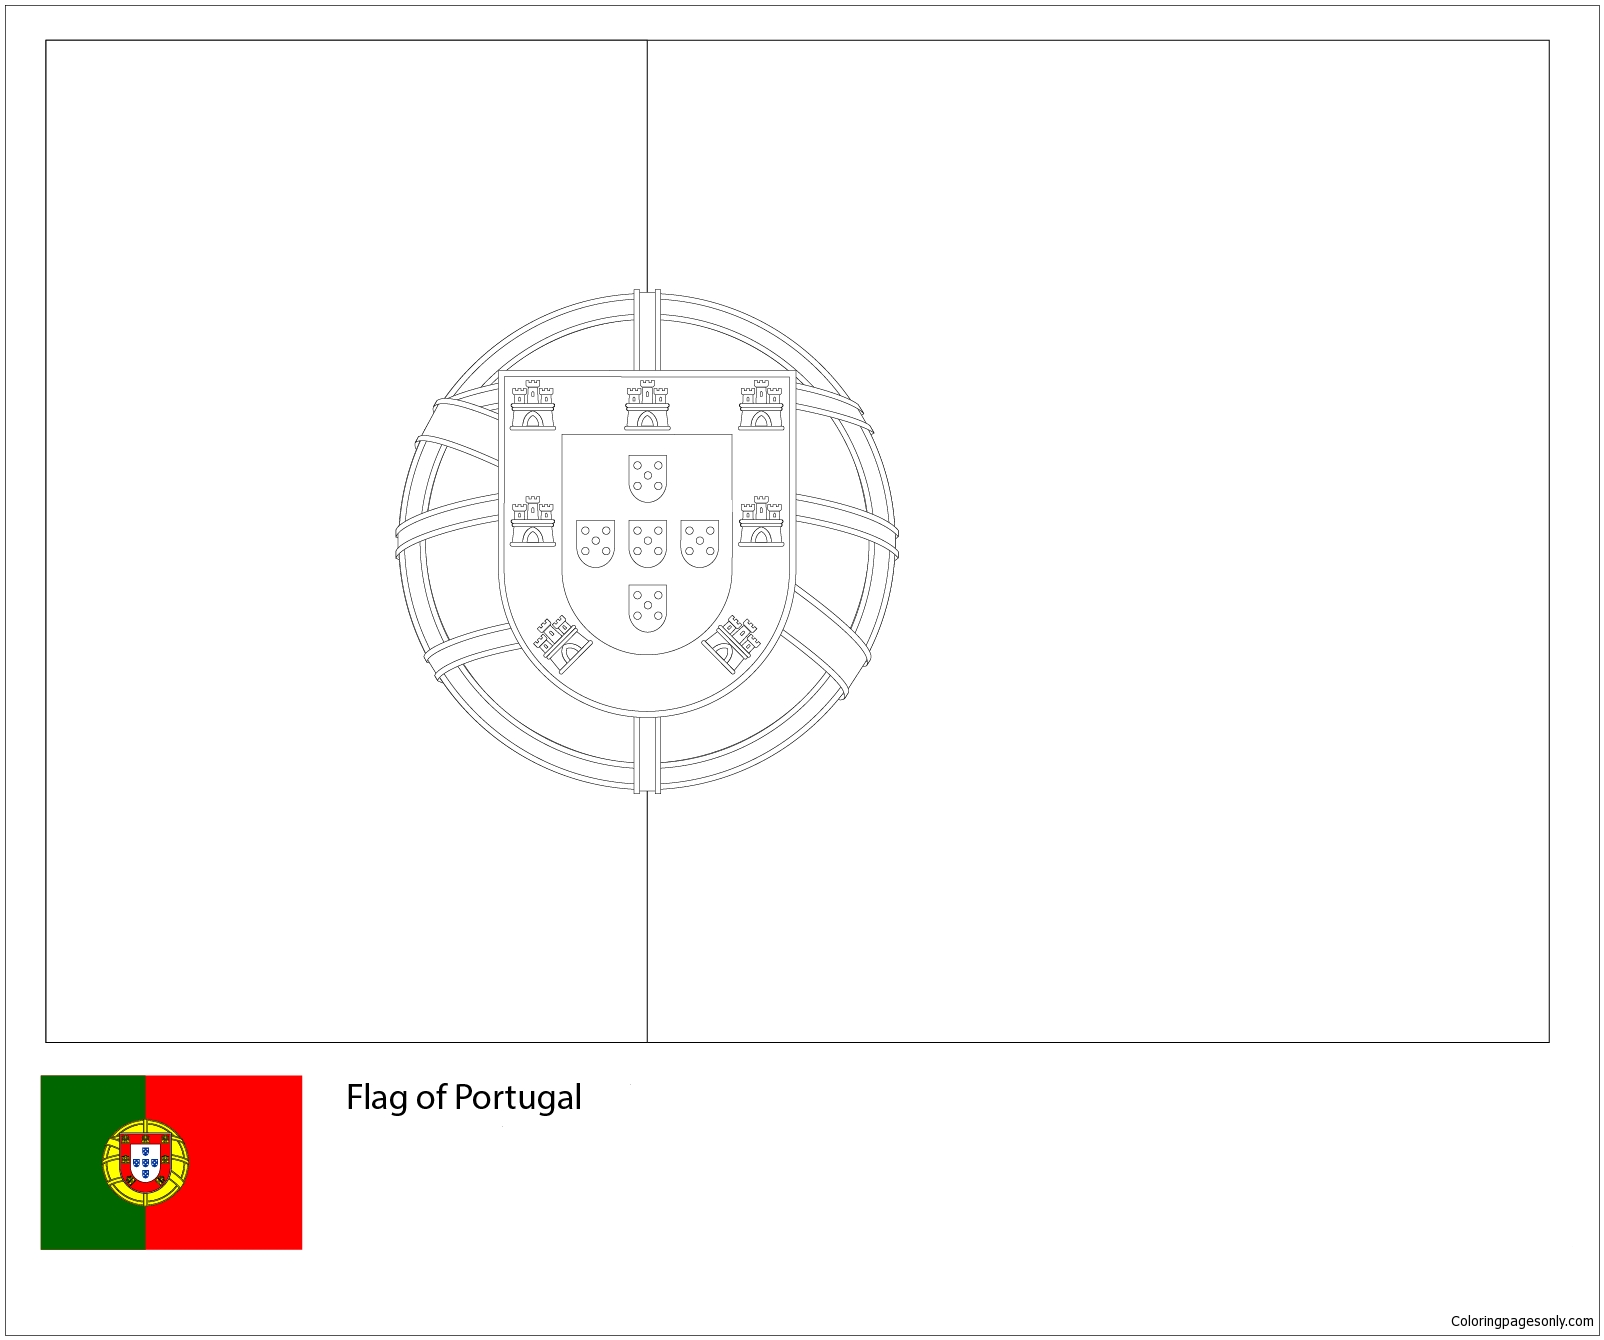 Flag of Portugal-World Cup 2018 Coloring Page